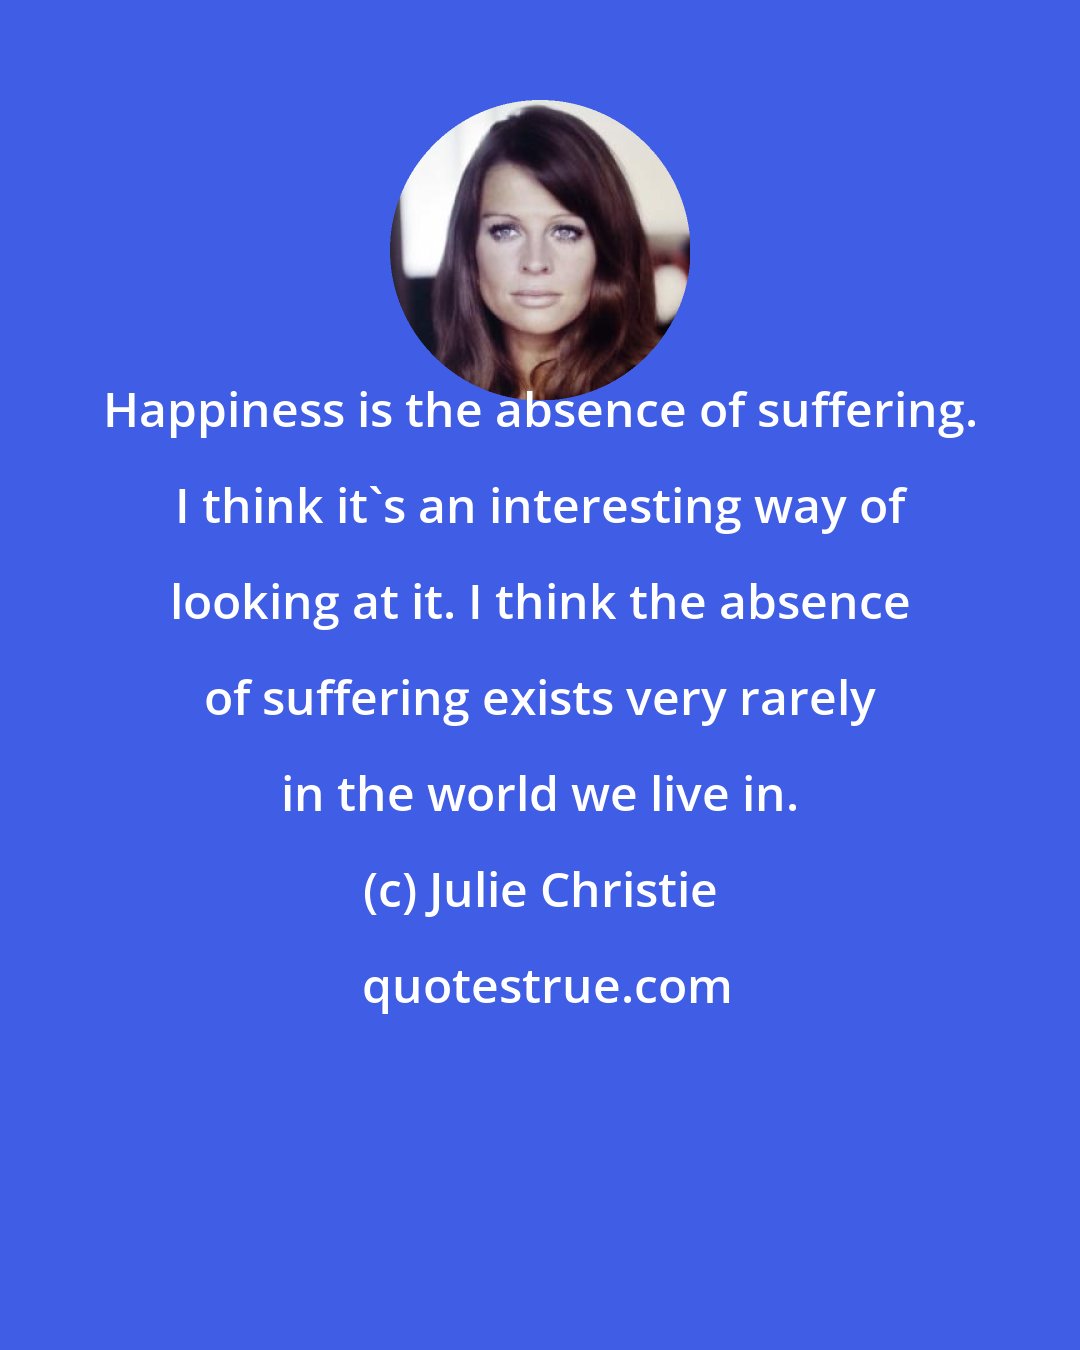 Julie Christie: Happiness is the absence of suffering. I think it's an interesting way of looking at it. I think the absence of suffering exists very rarely in the world we live in.